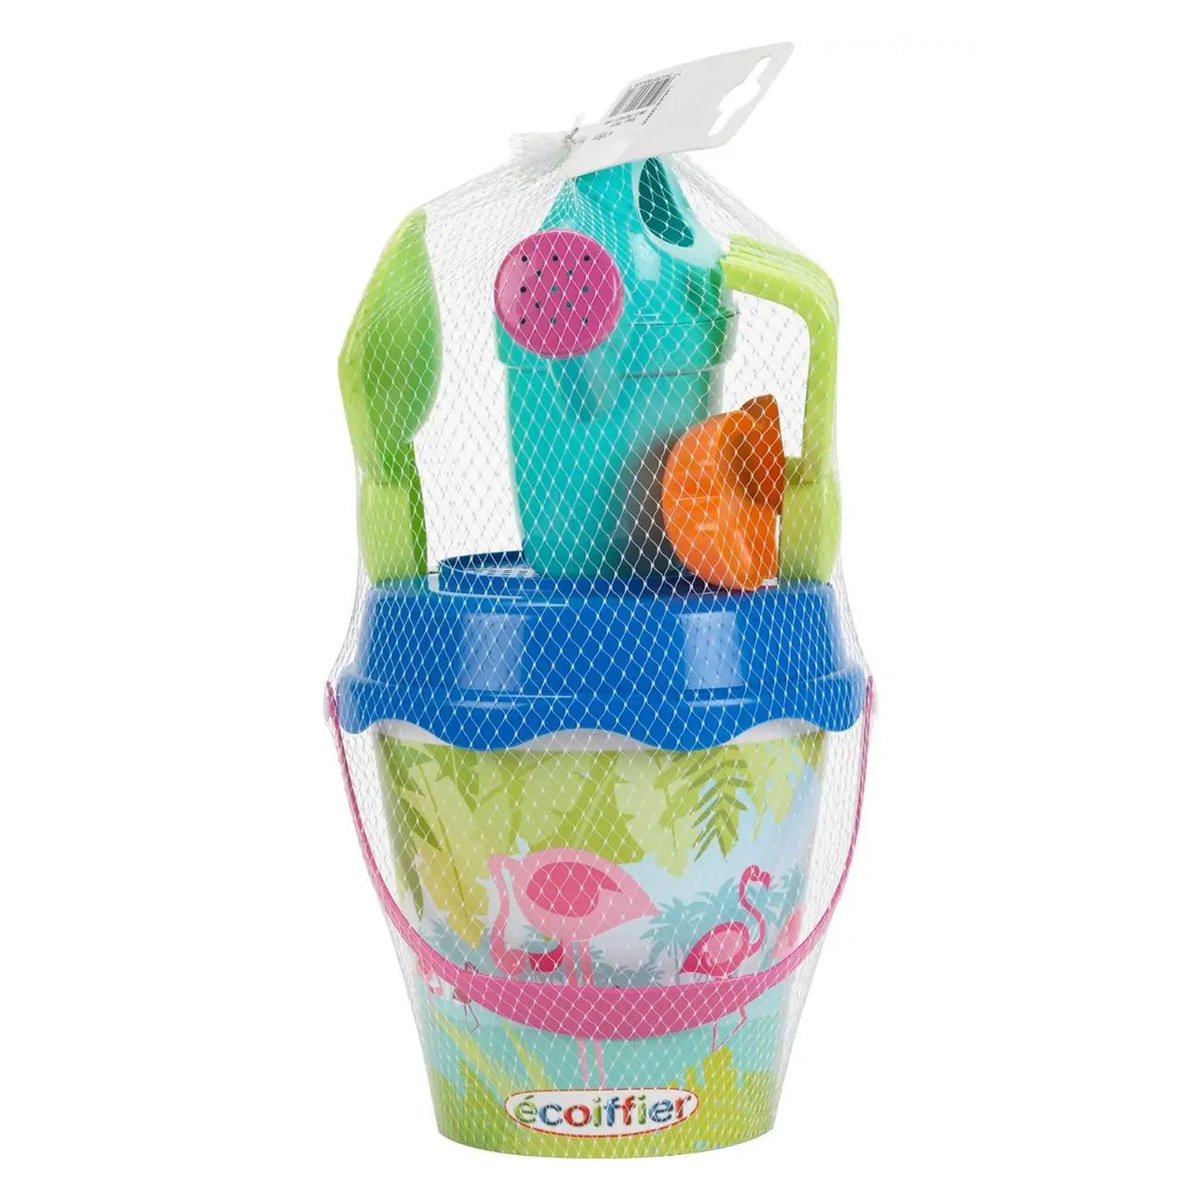 Ecoiffier 17 cm Flamingo IML Beach Bucket with Accessories, Assorted, 7600000680